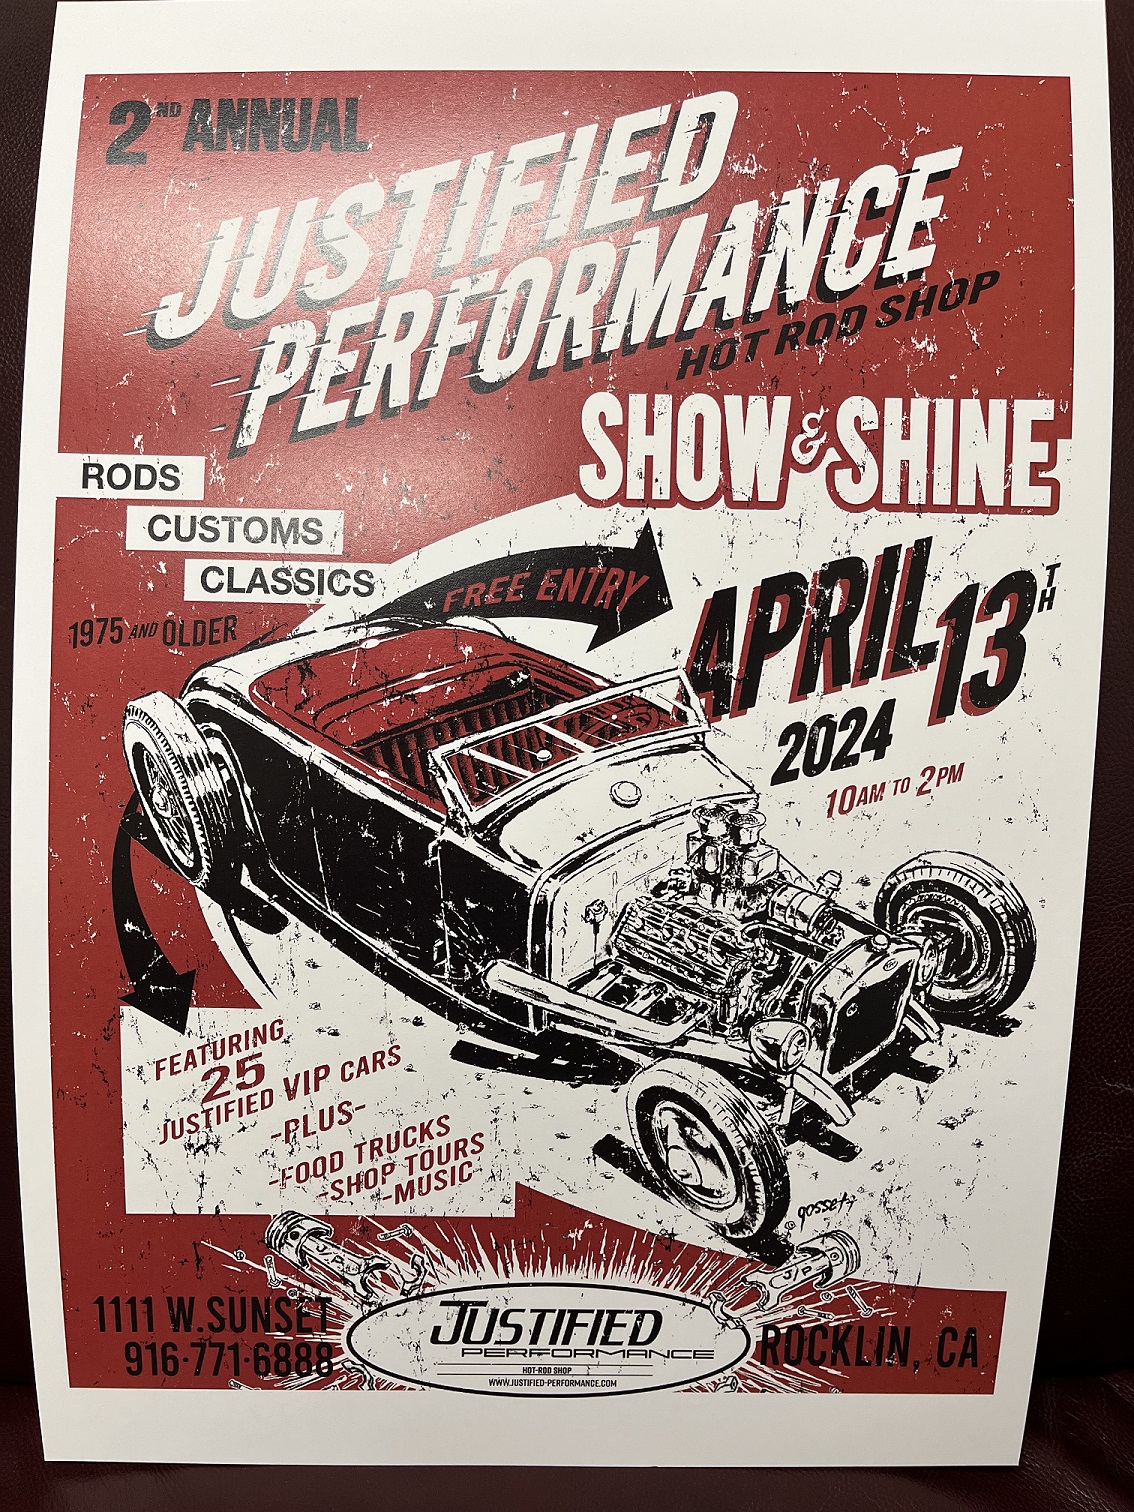 Justified Performance Show & Shine